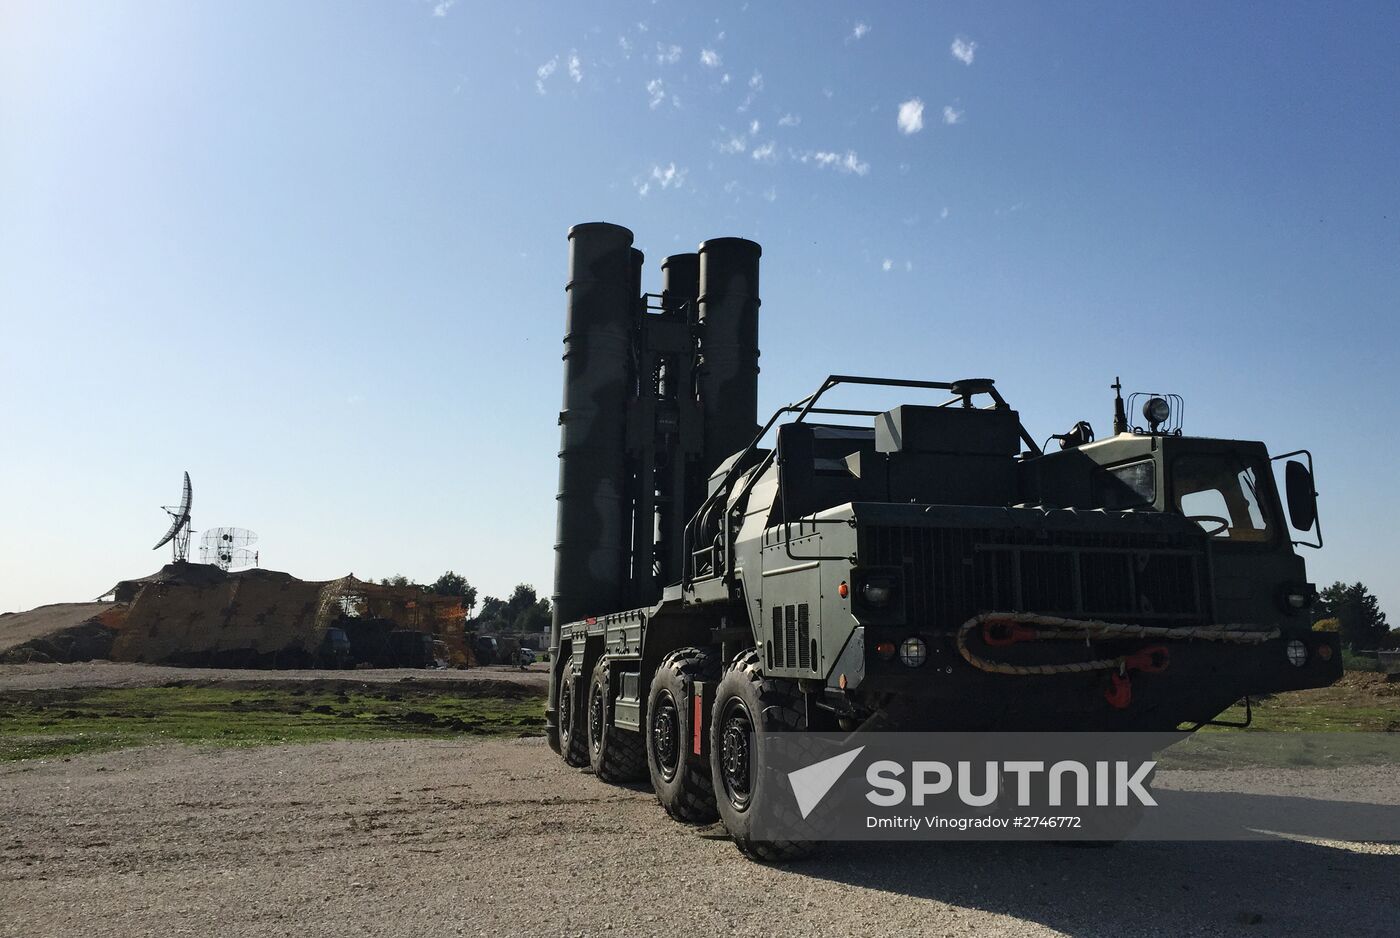 Russia deploys S-400 air defence missile system in Syria